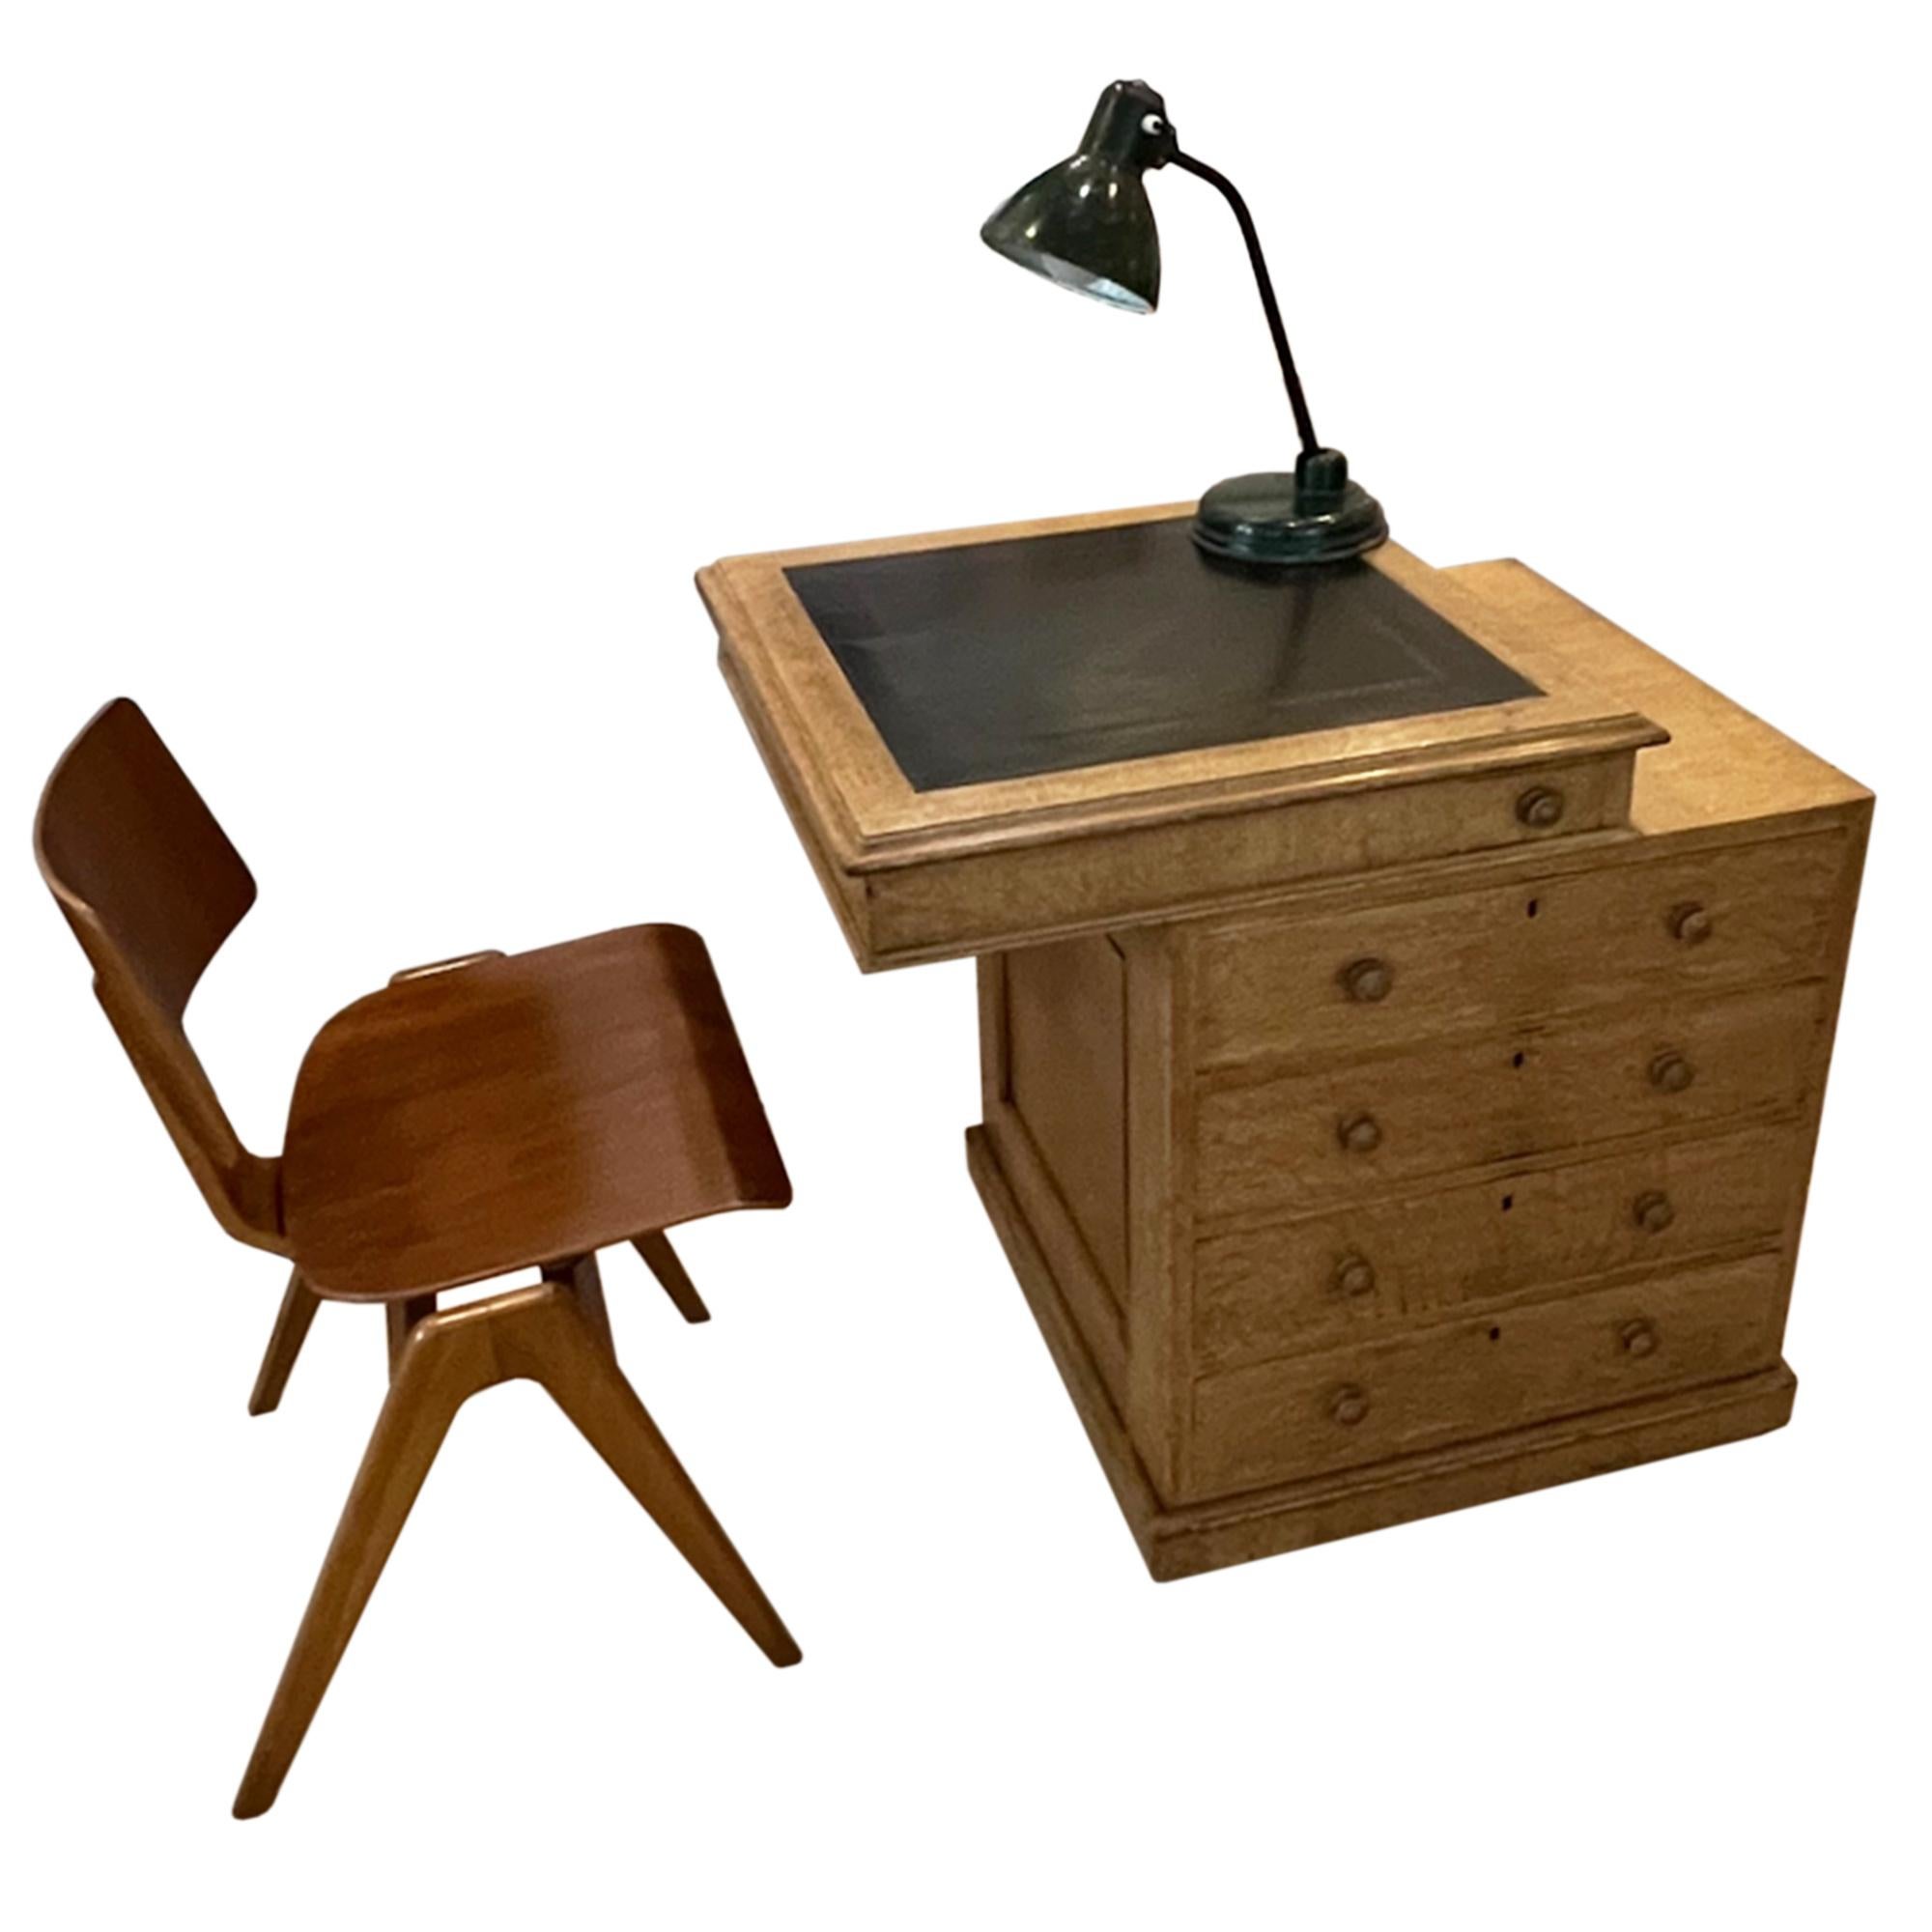 This ingenious desk was made in Britain around 1900. We love the secret drawer for stationary and the 4 main drawers provide ample storage. The handles and key holes on the opposite side are purely decorative.

As you can see the leather top can